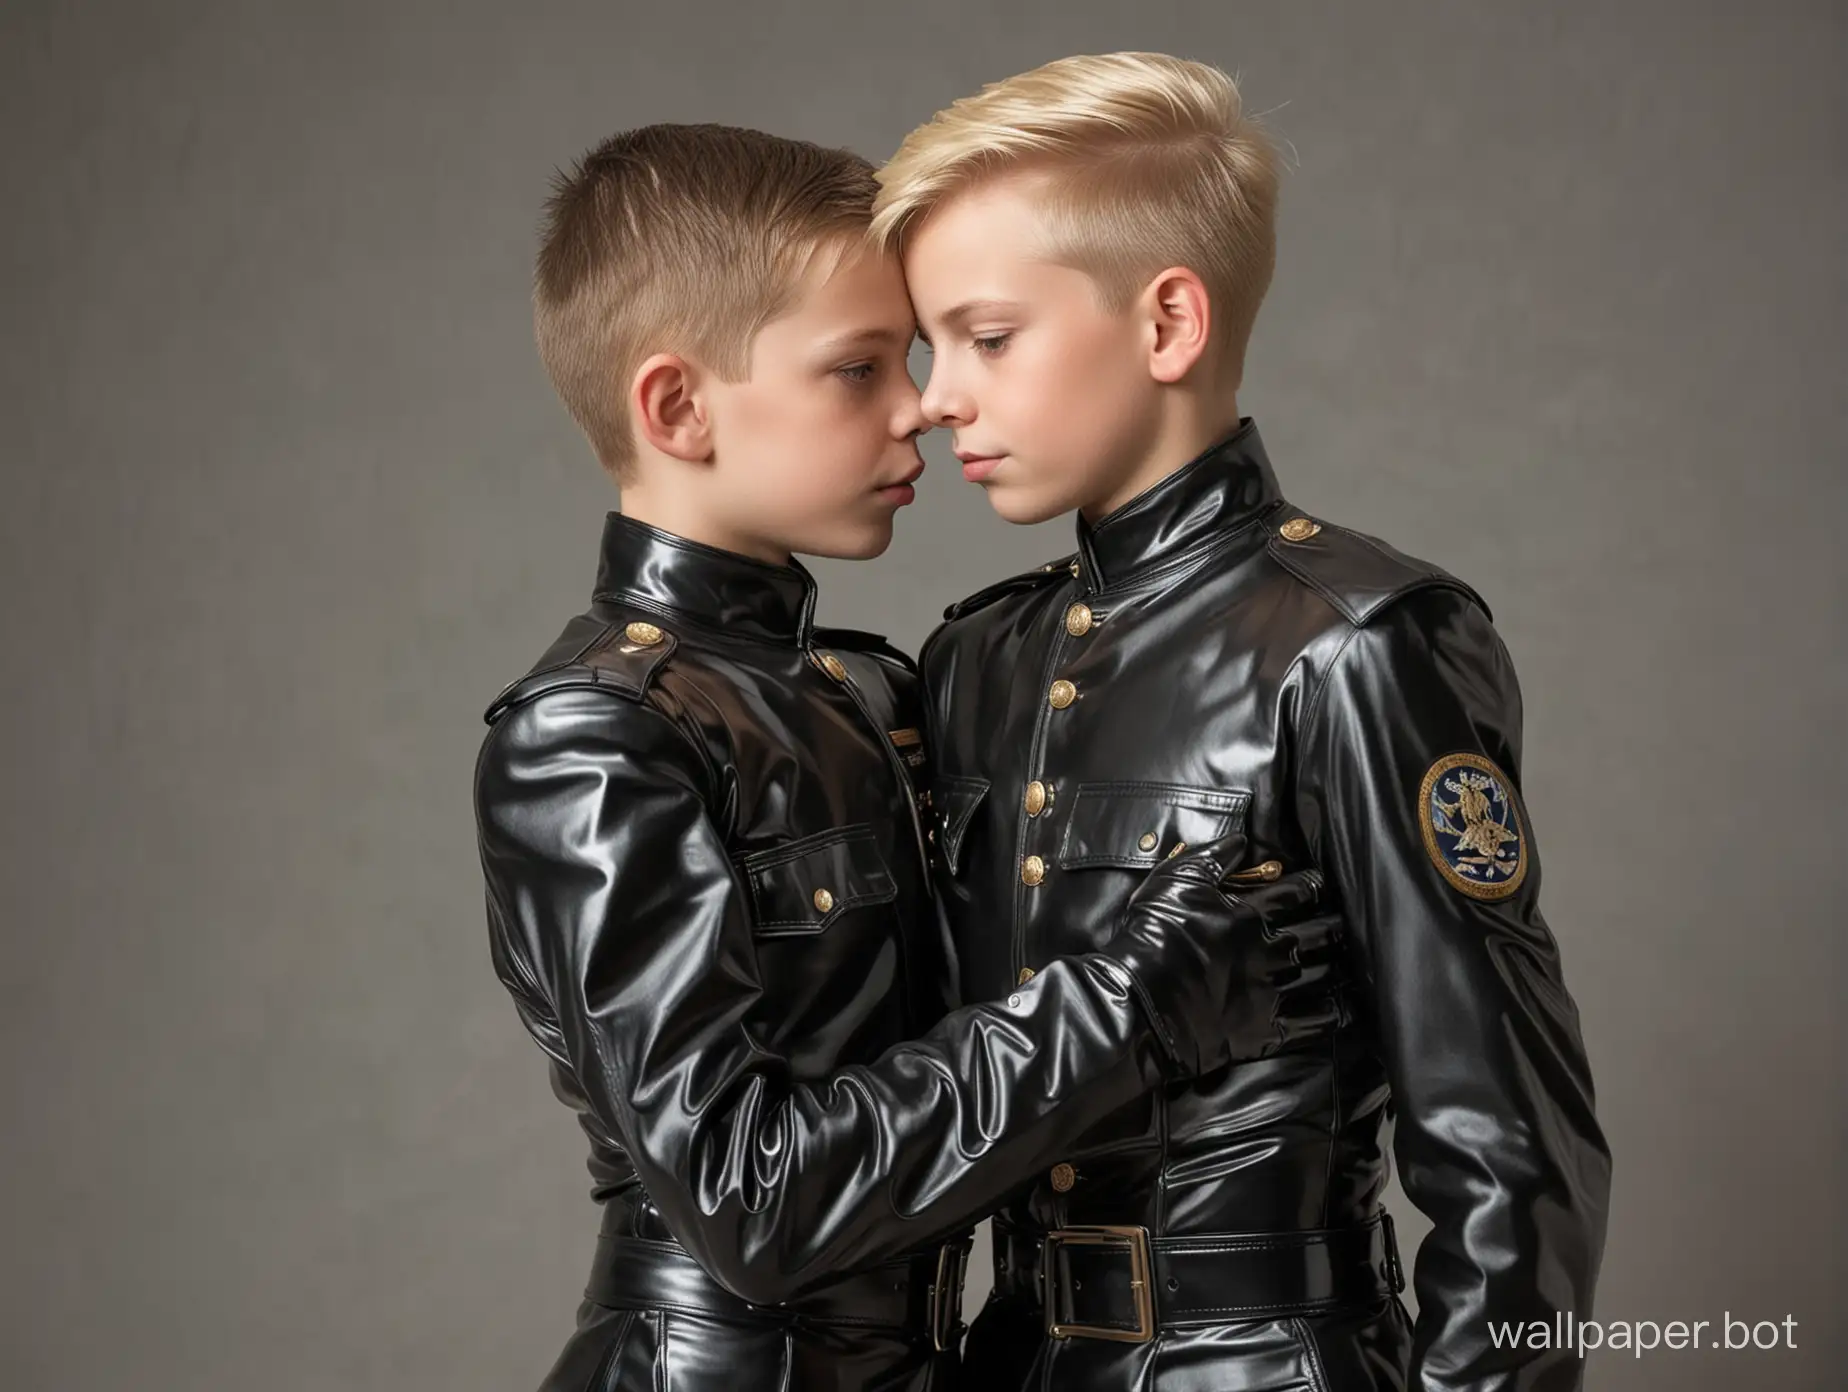 two young boys, one blond, one dark-haired, embracing each other in latex soldier uniforms,